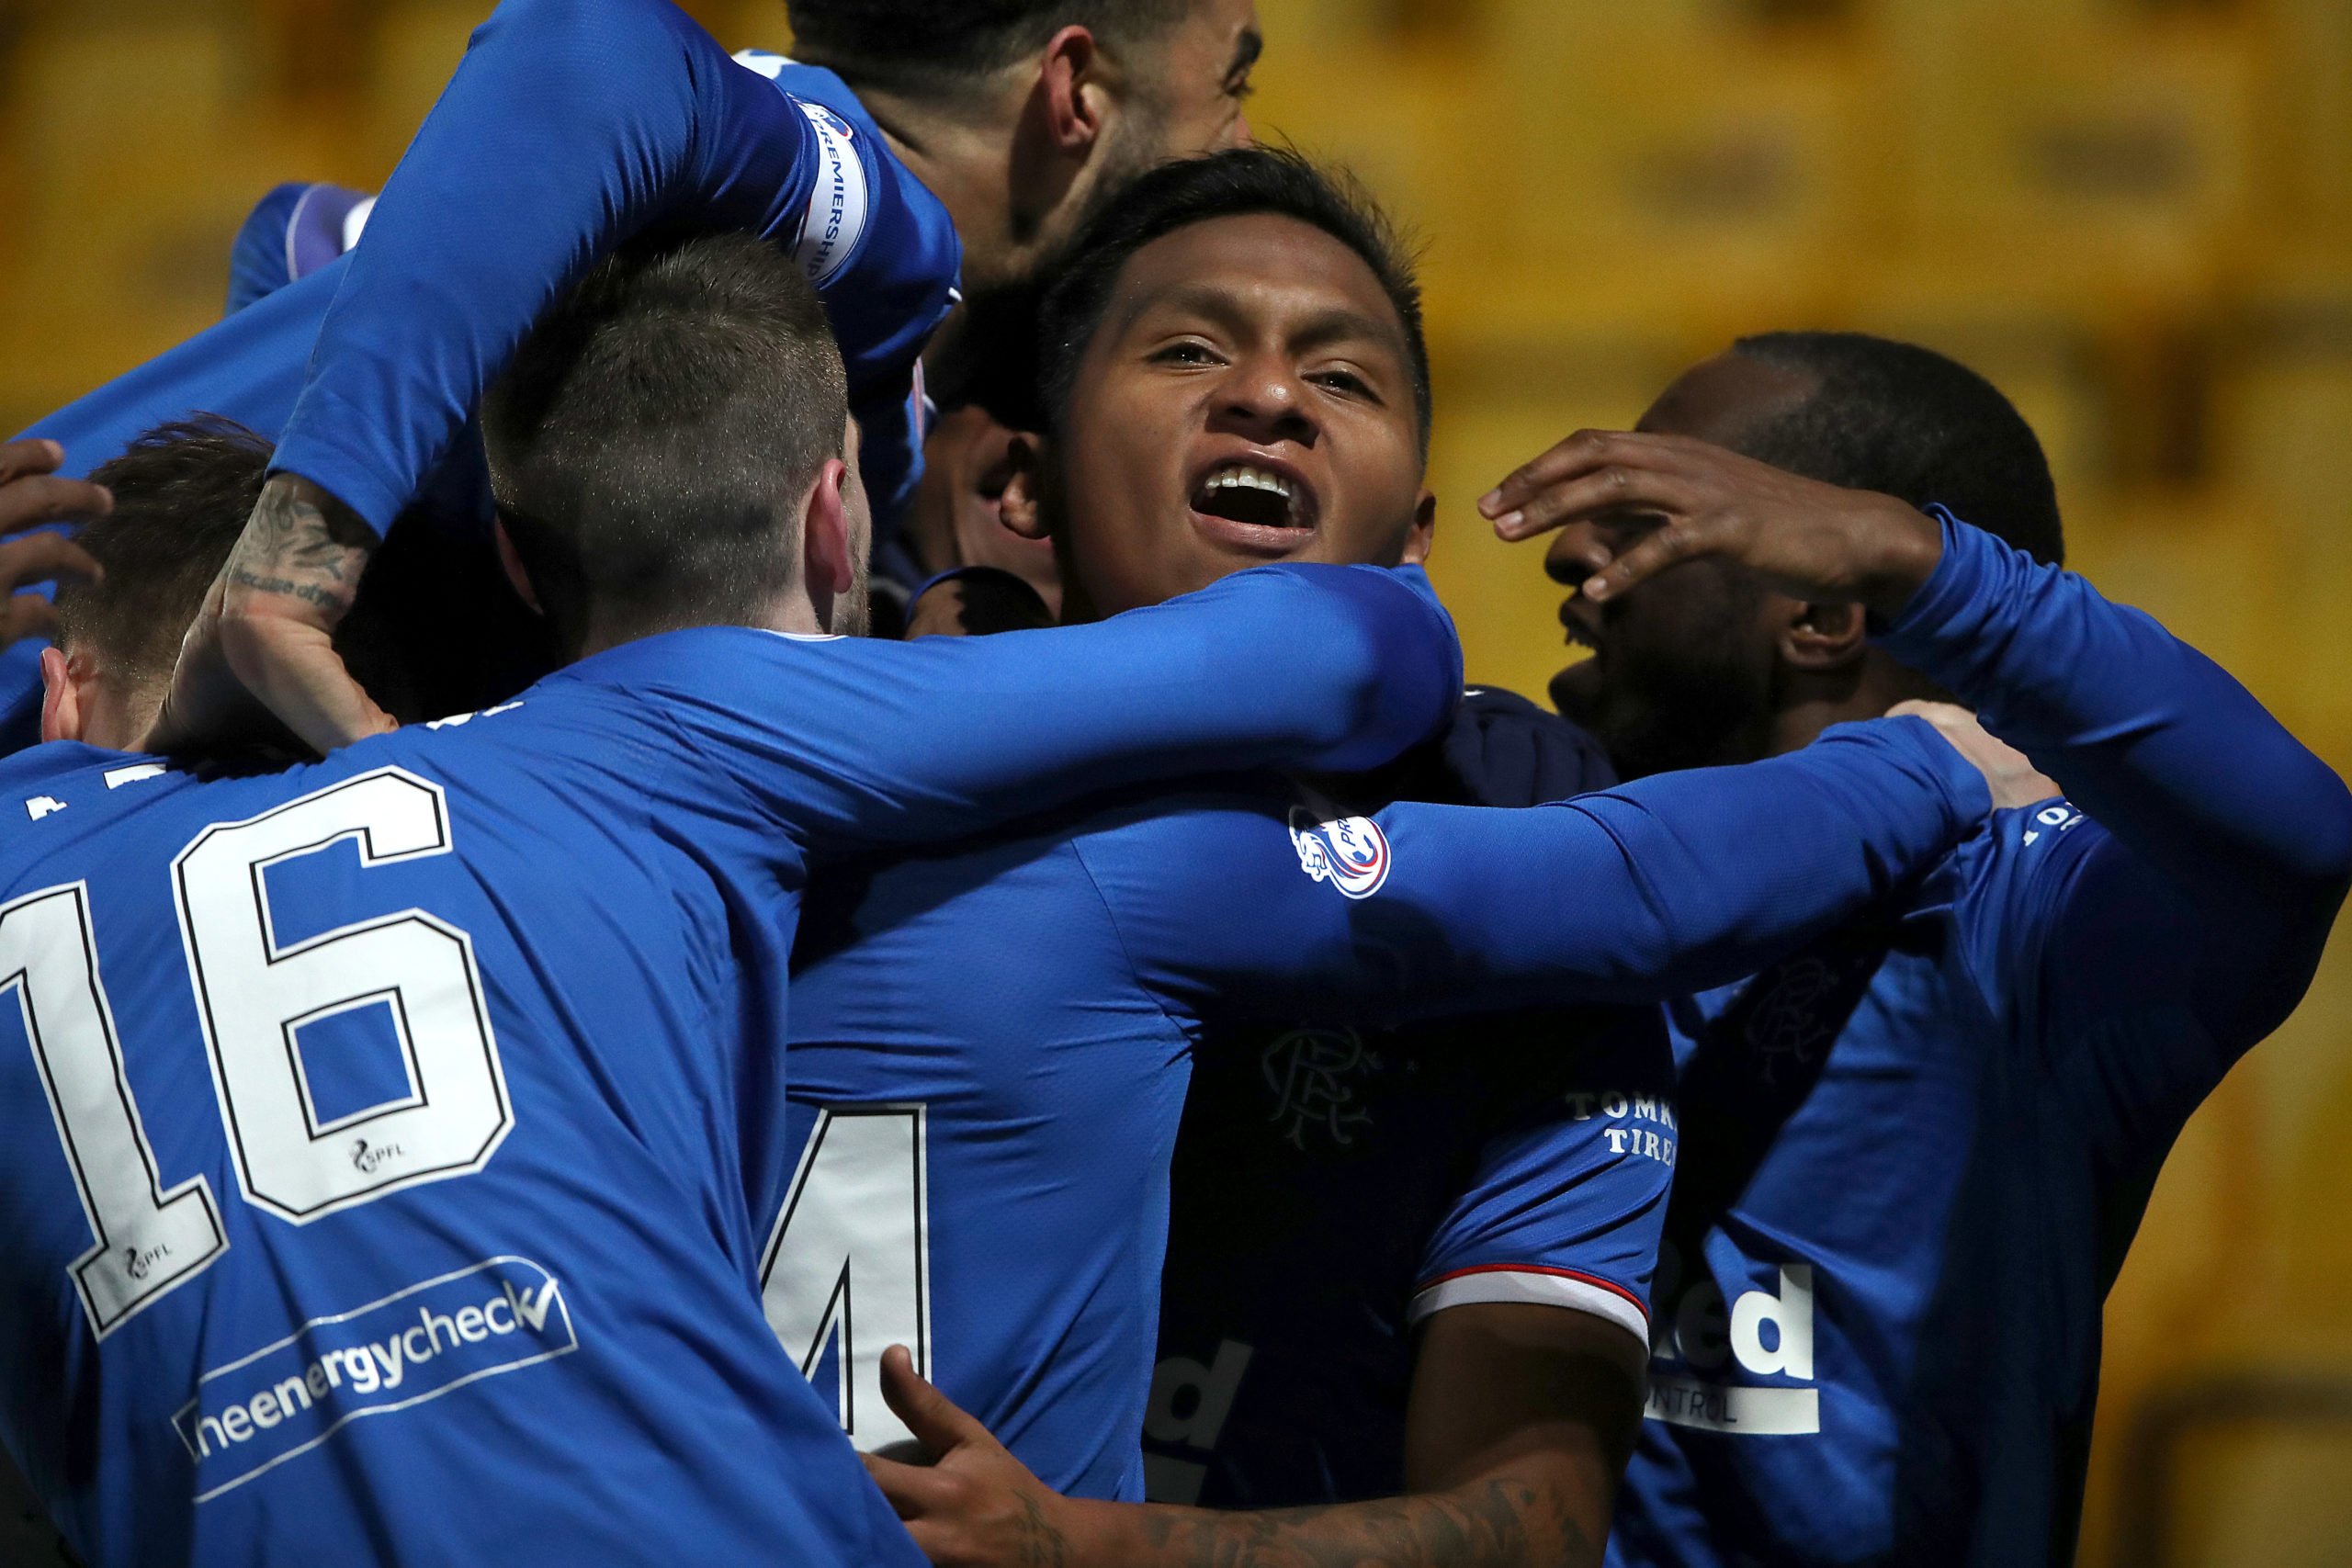 LIVINGSTON, SCOTLAND - MARCH 03: Alfredo Morelos of Rangers celebrates with team mates after scoring their side's first goal during the Ladbrokes Scottish Premiership match between Livingston and Rangers at Tony Macaroni Arena on March 03, 2021 in Livingston, Scotland. Sporting stadiums around the UK remain under strict restrictions due to the Coronavirus Pandemic as Government social distancing laws prohibit fans inside venues resulting in games being played behind closed doors. (Photo by Ian MacNicol/Getty Images)